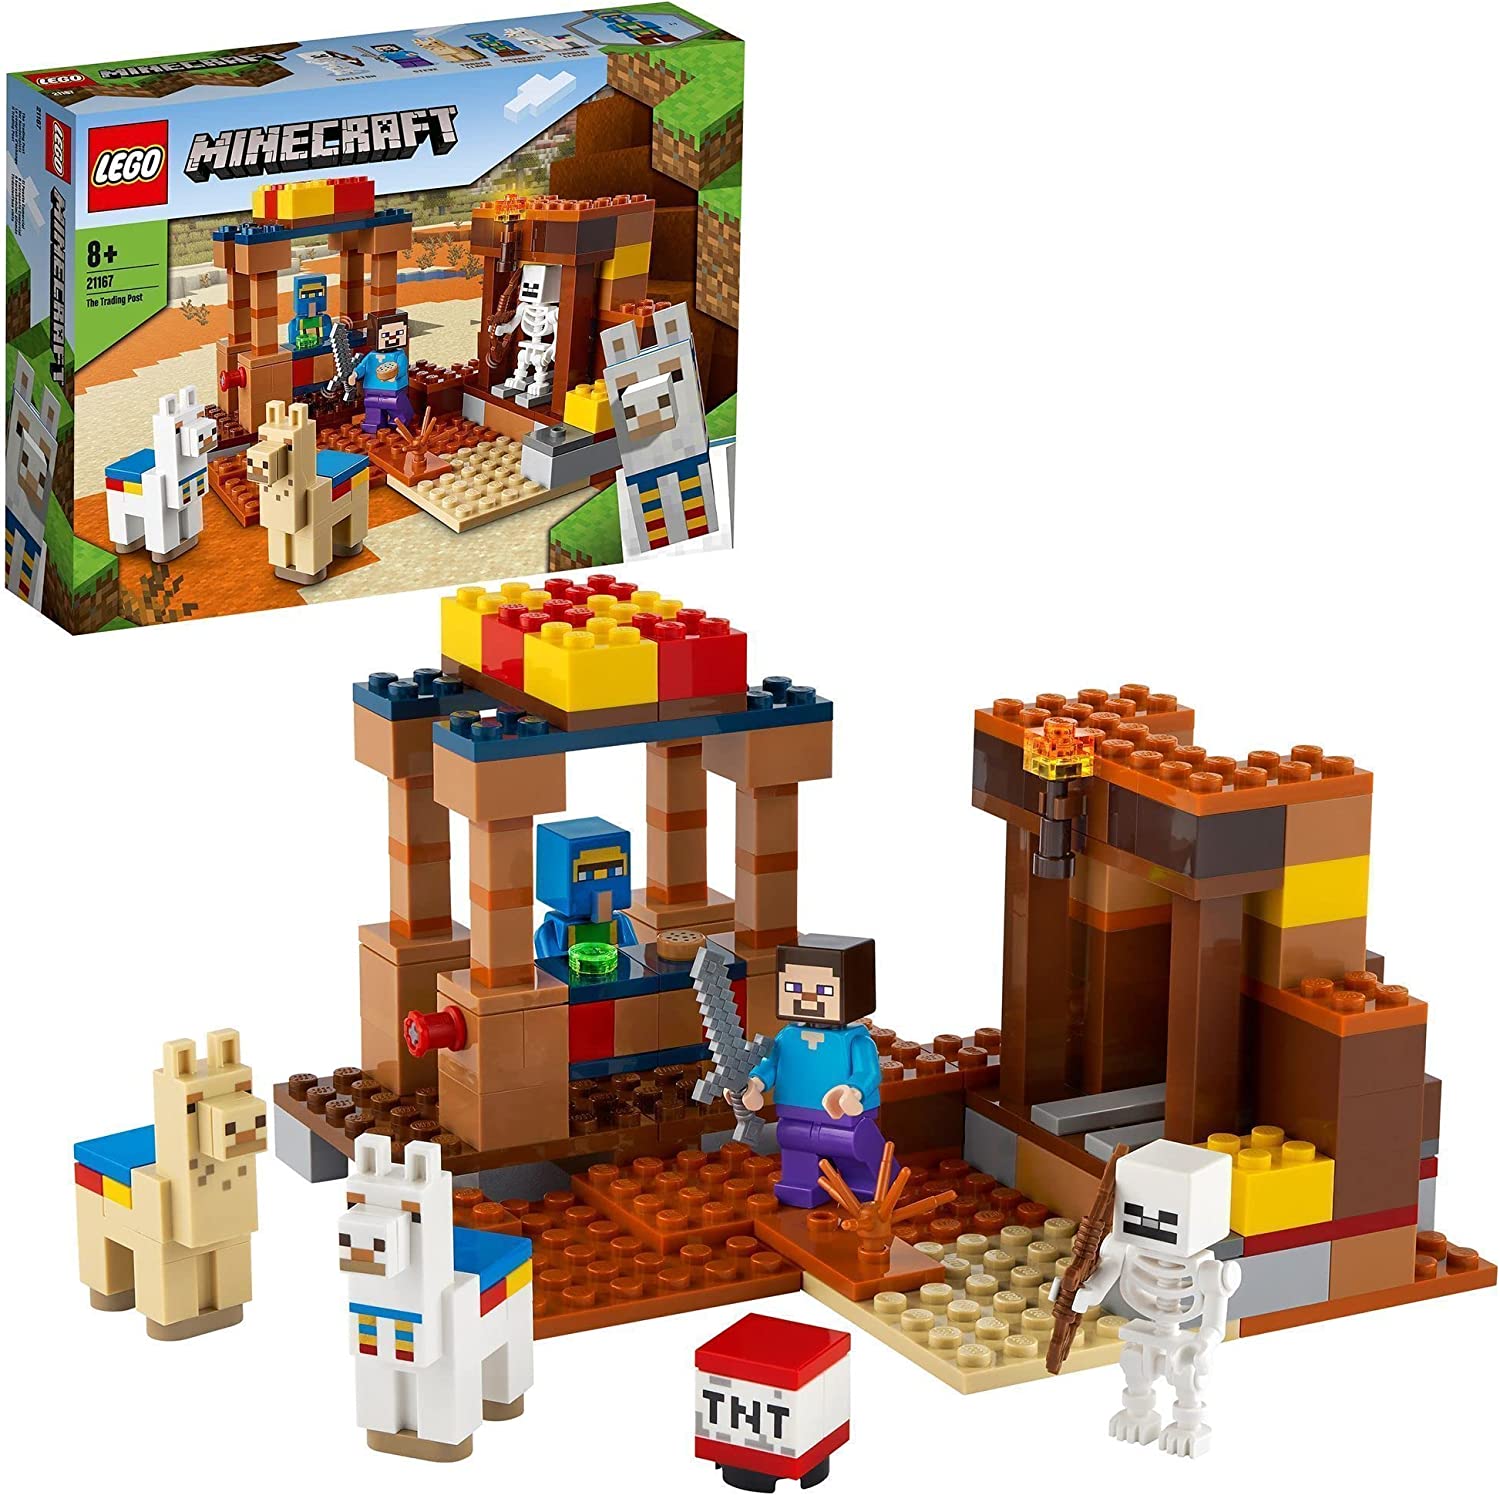 LEGO 21167 Minecraft The Trade Place, Building Kit with Steve, Skeleton and Llamas Figures Toys for Boys and Girls from 8 Years